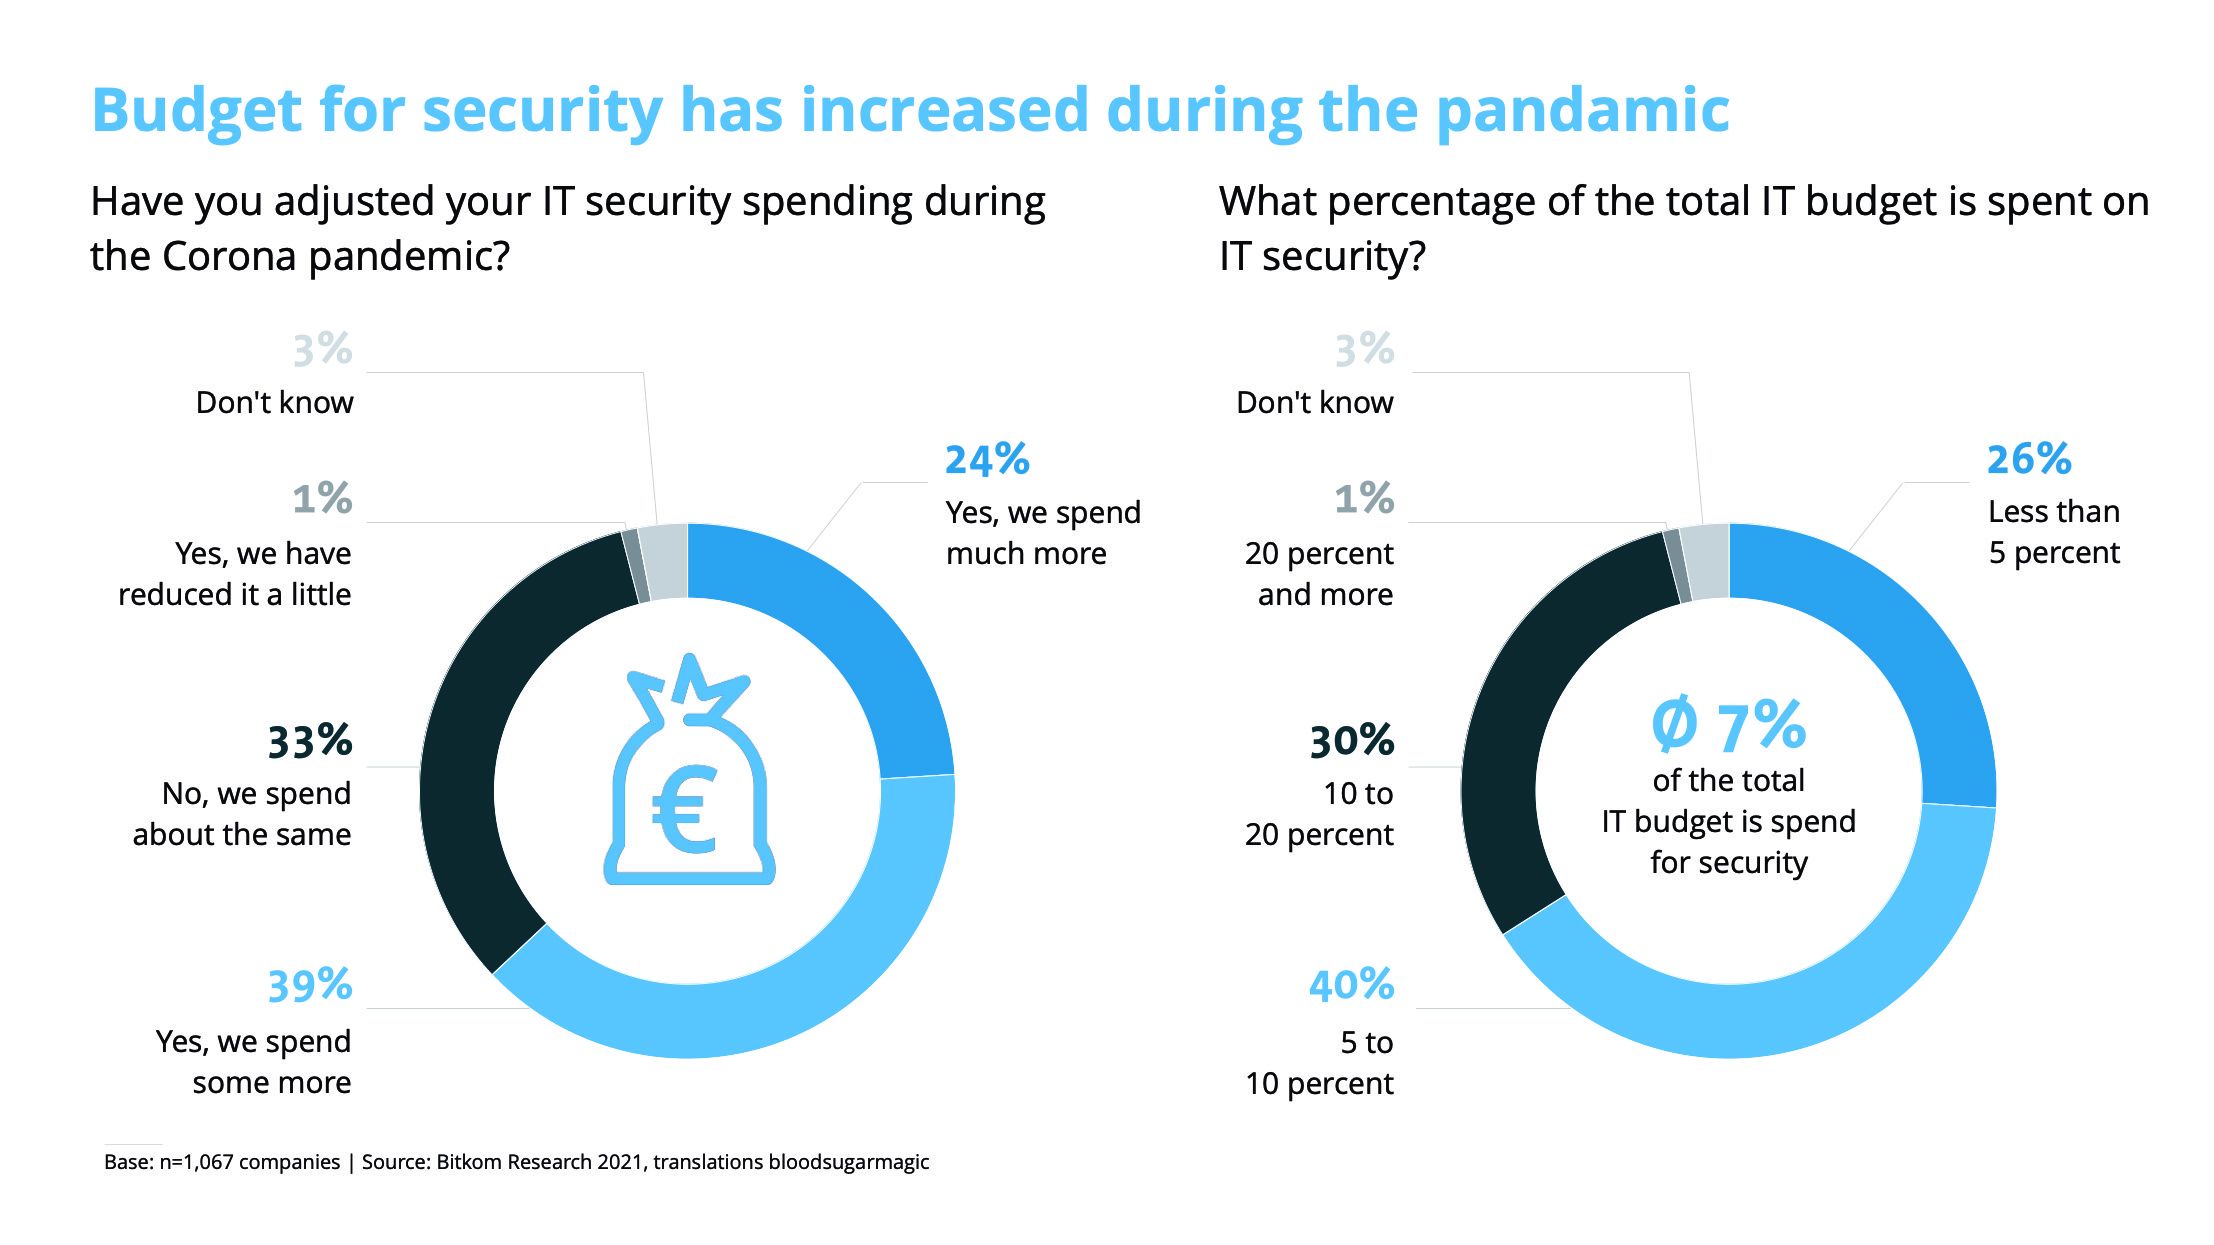 Budget for security has increased during the pandemic